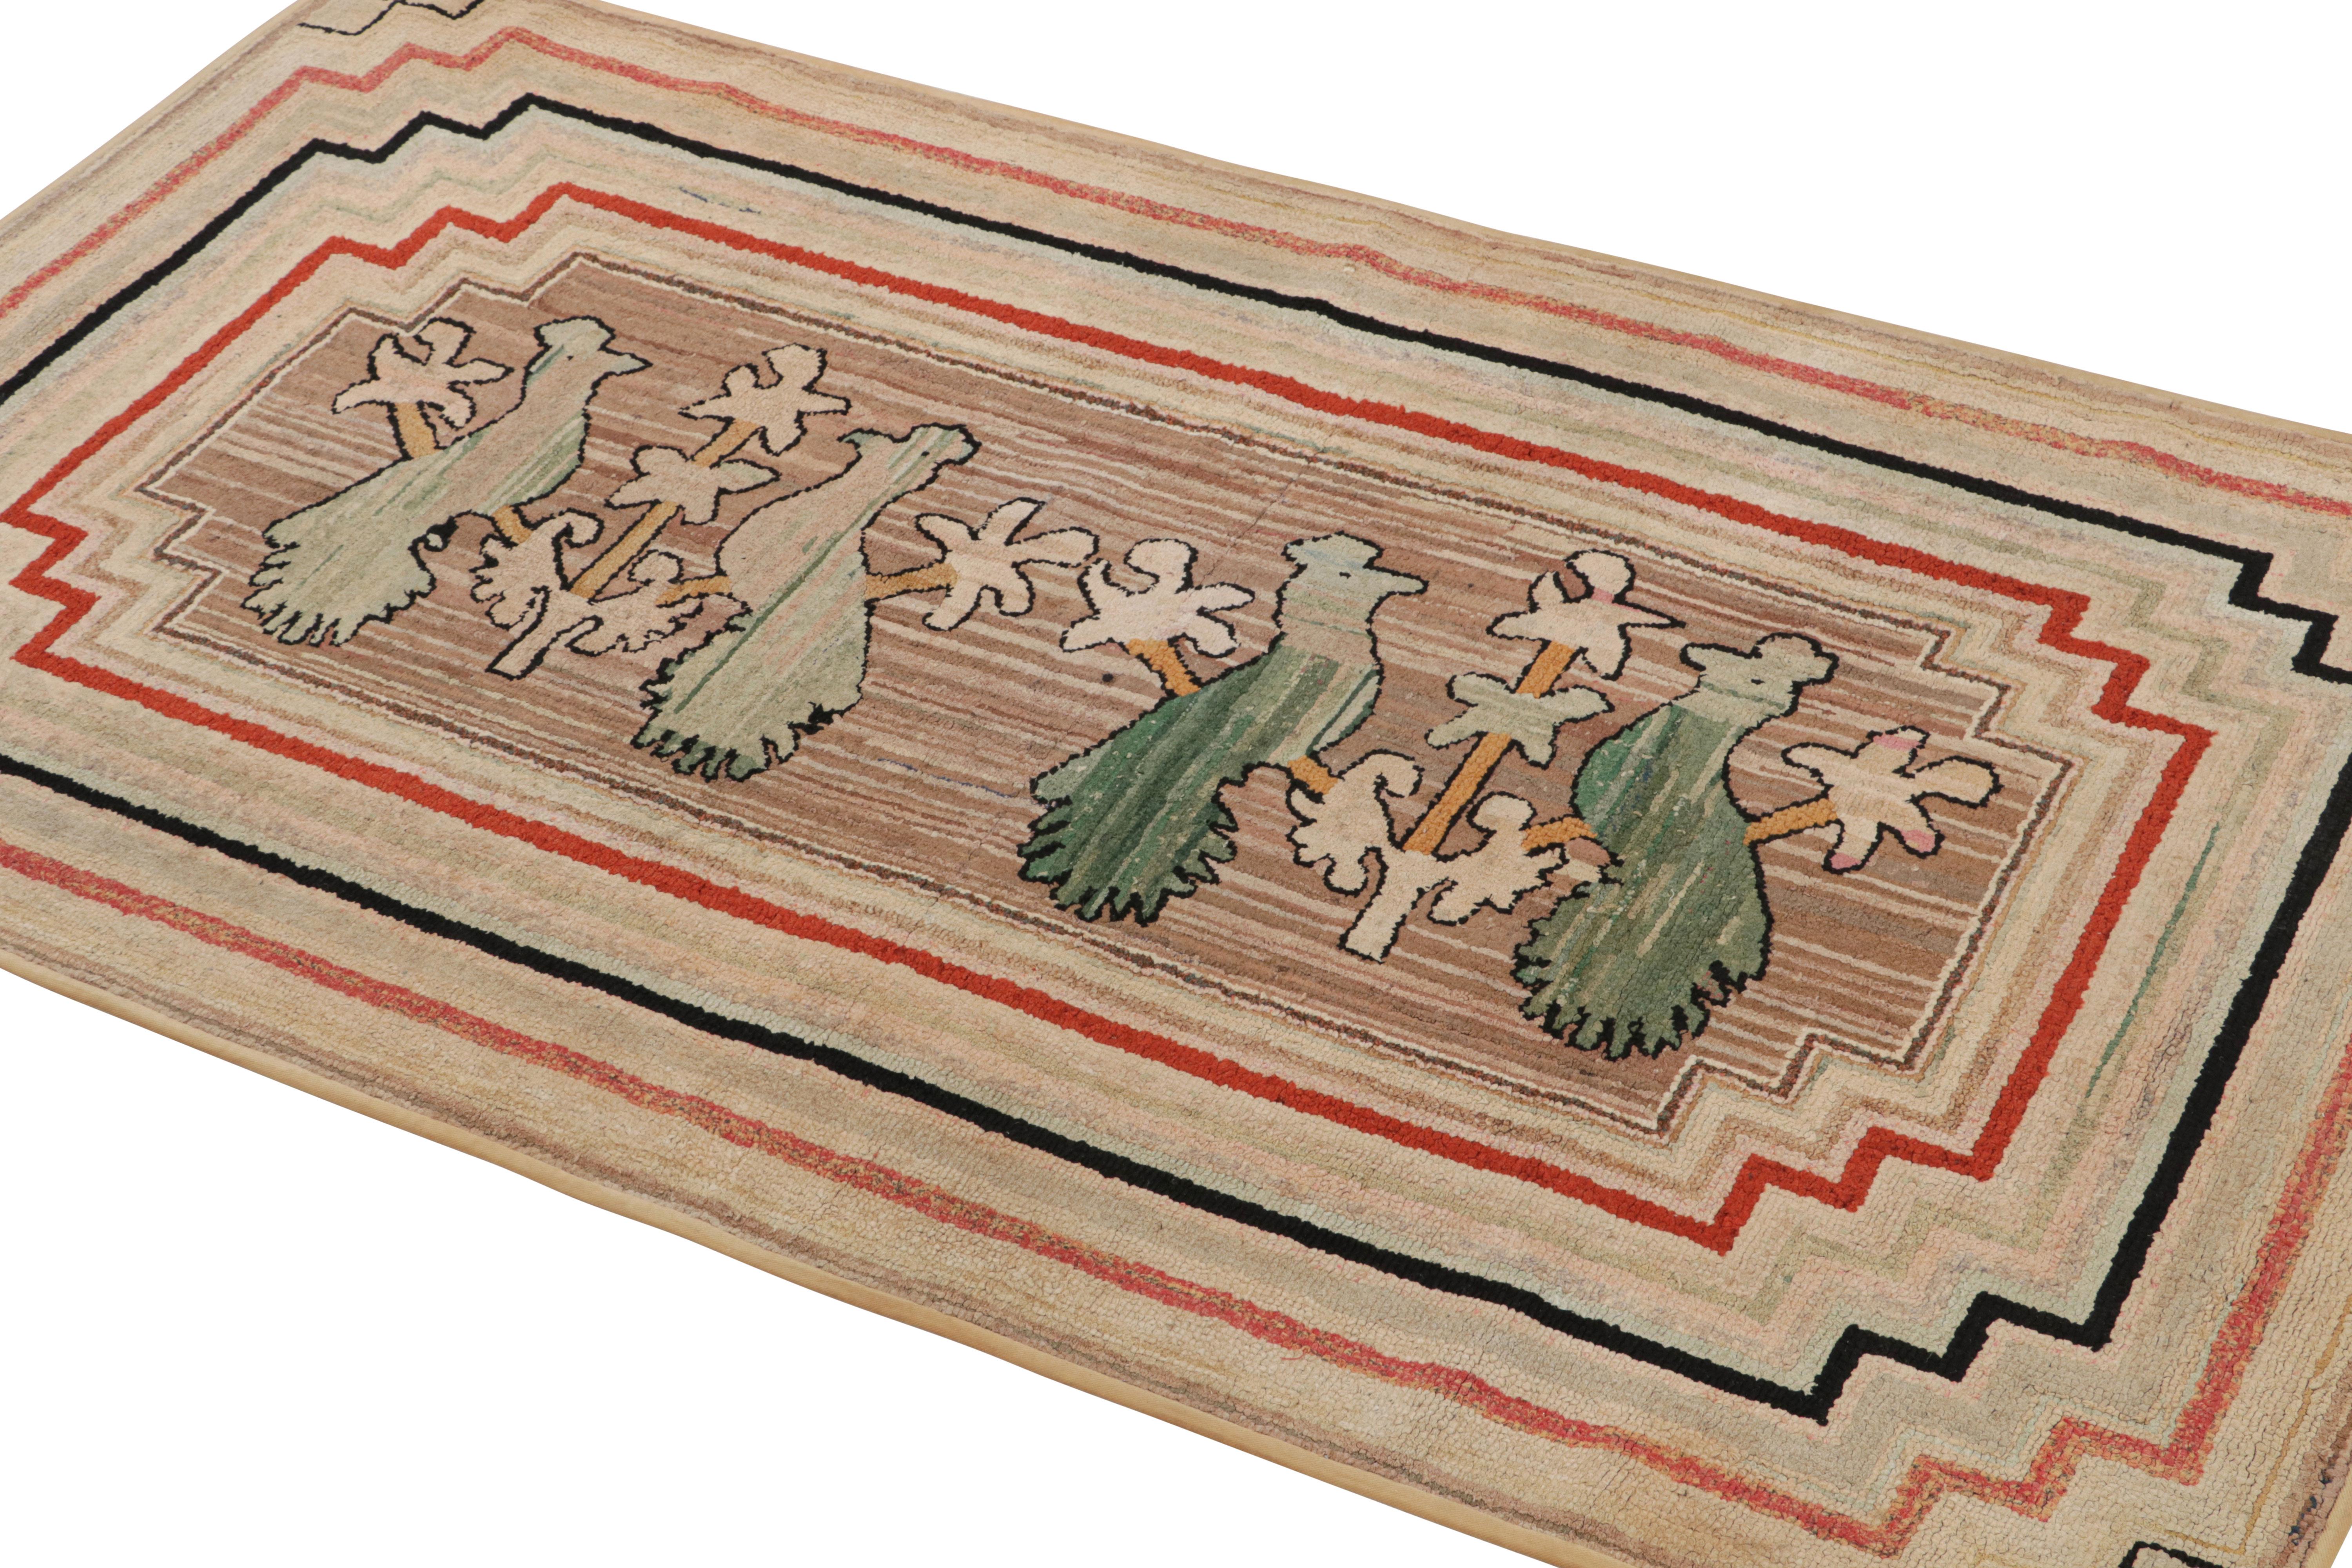 A rare 3x6 antique hooked rug in brown, of United States’ provenance, handmade in wool and fabric circa 1920-1930 with pictorials and geometric borders.

On the Design: 

This particular piece enjoys bird pictorials, almost like roosters, in green